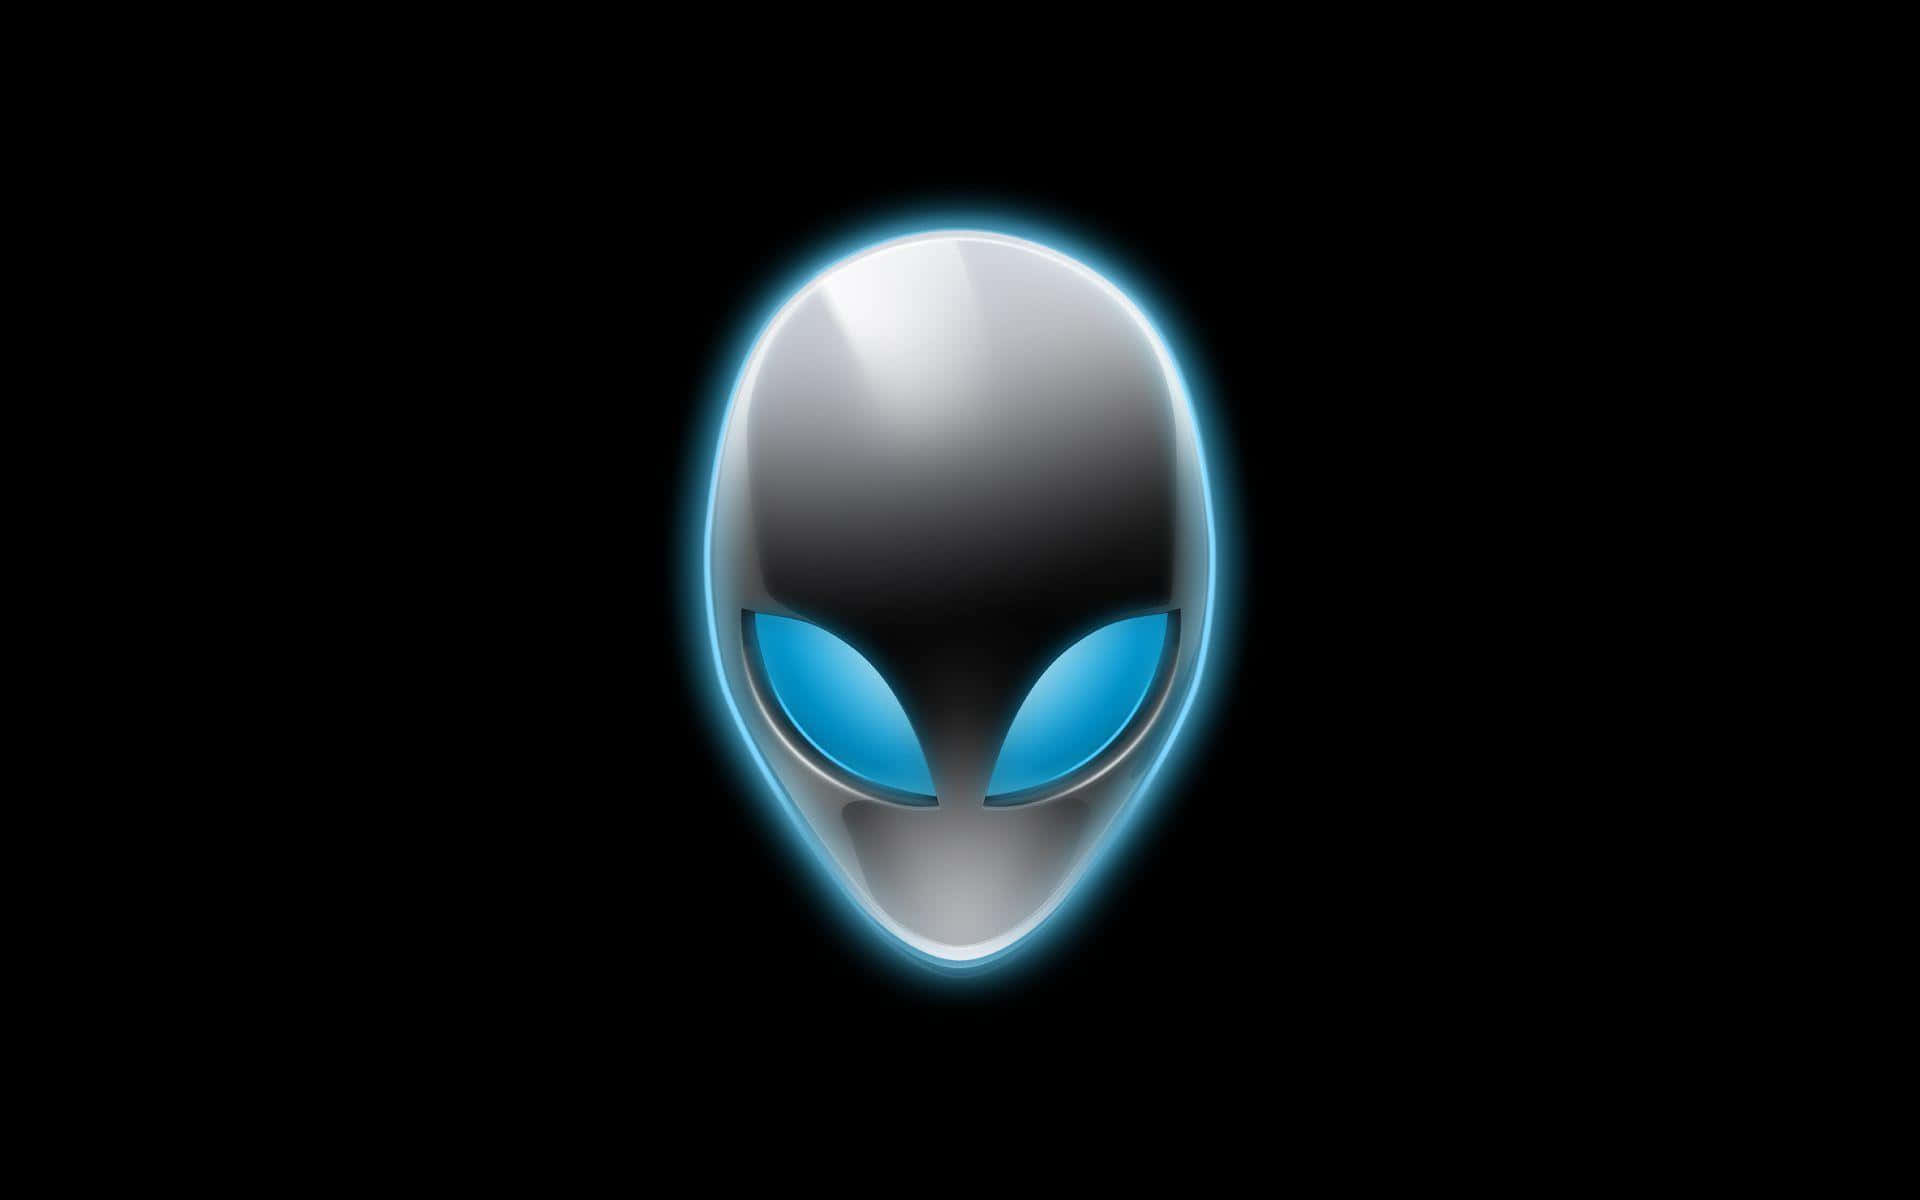 Get a kick-ass experience with Alienware